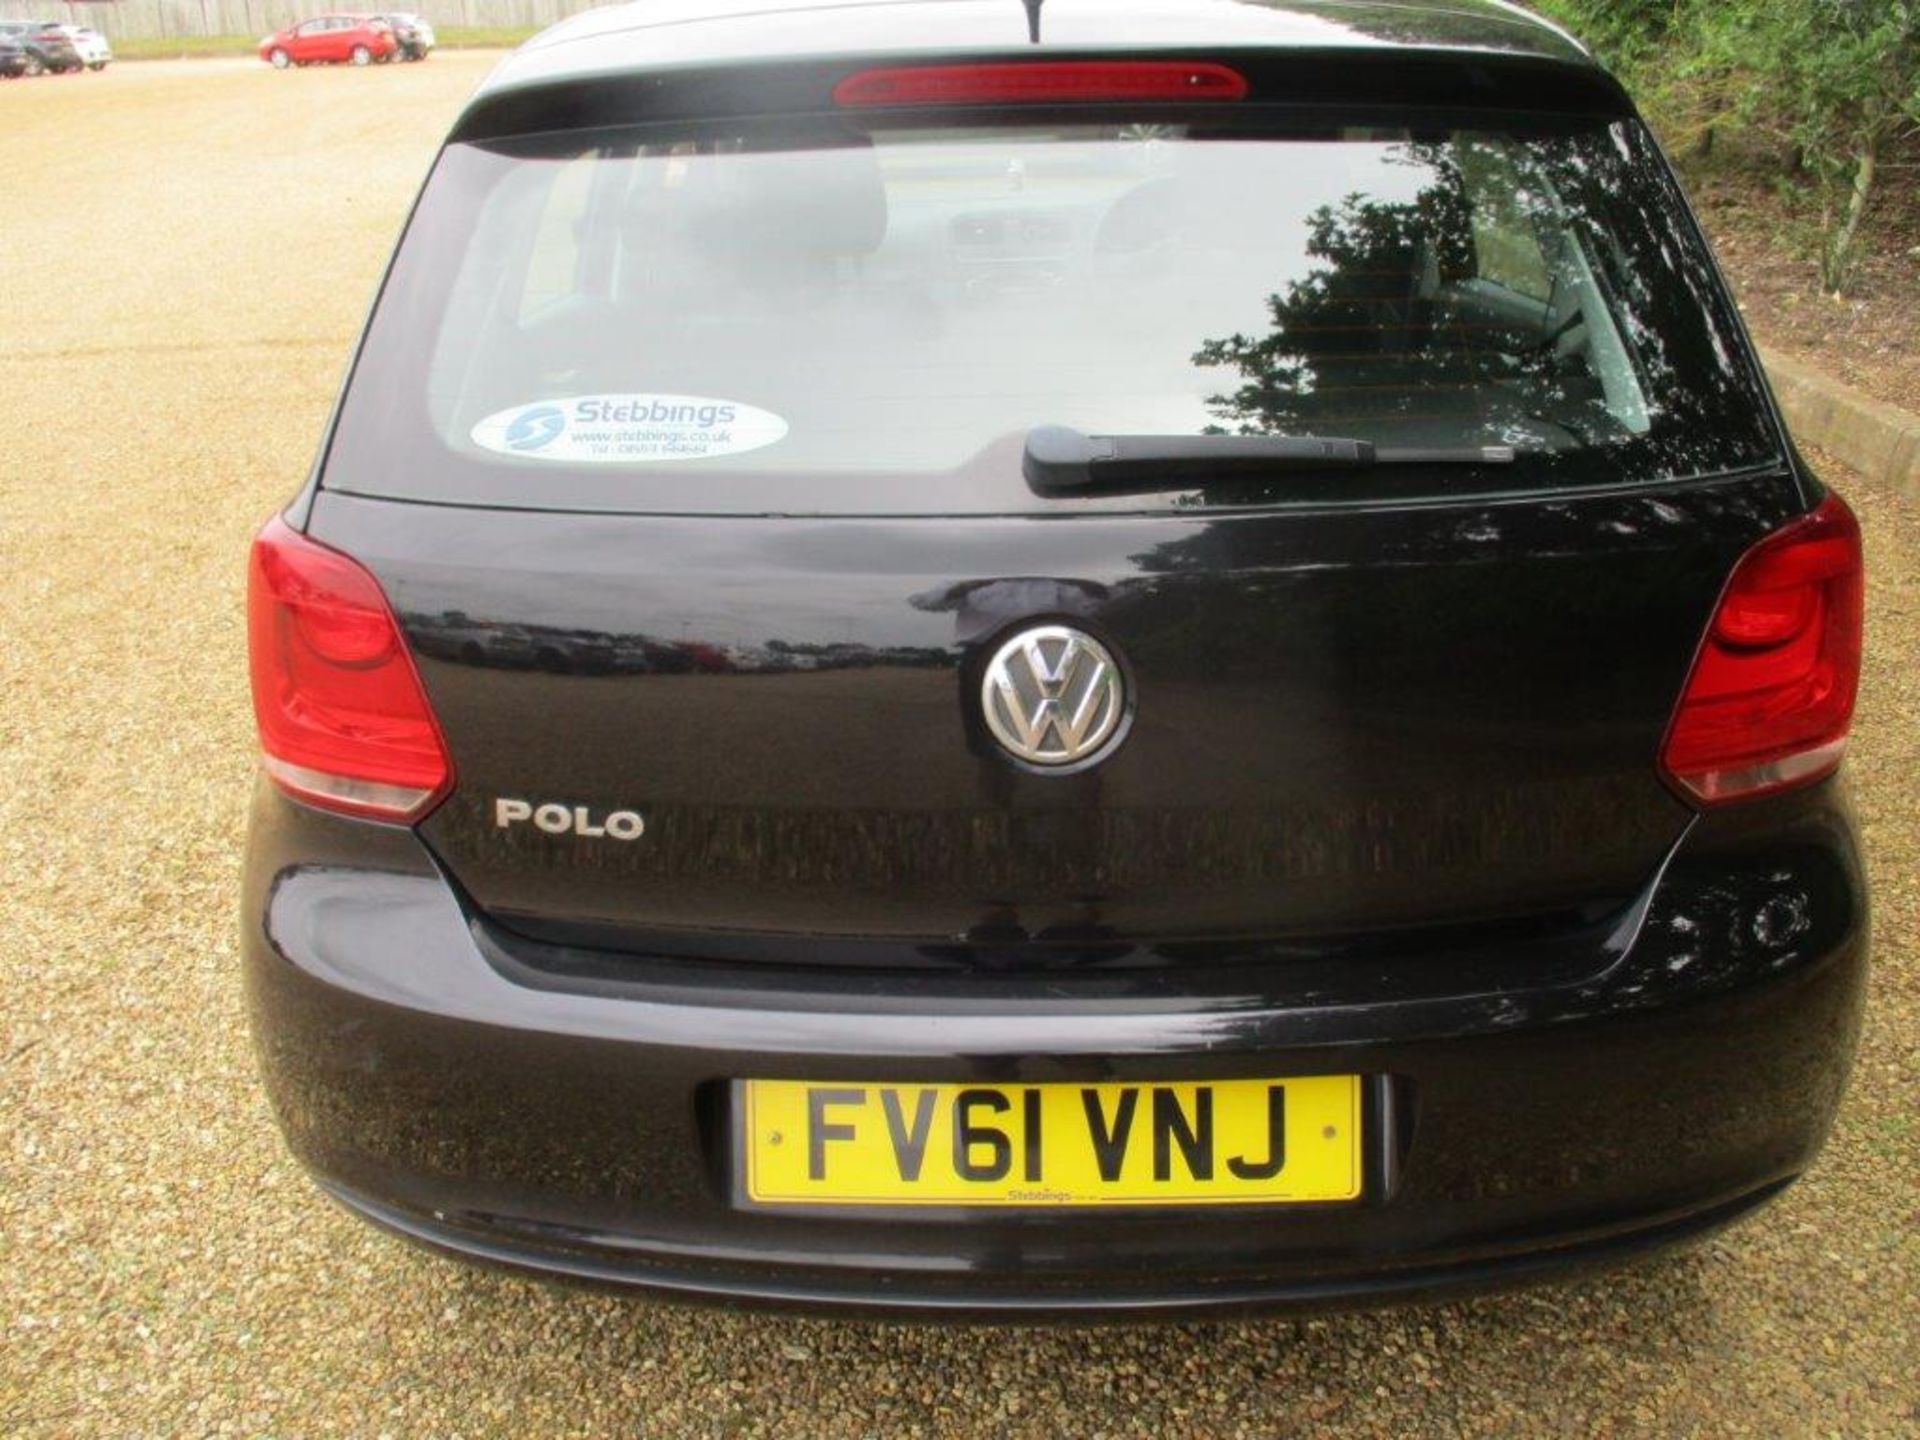 61 11 VW Polo S 60 - Image 4 of 19